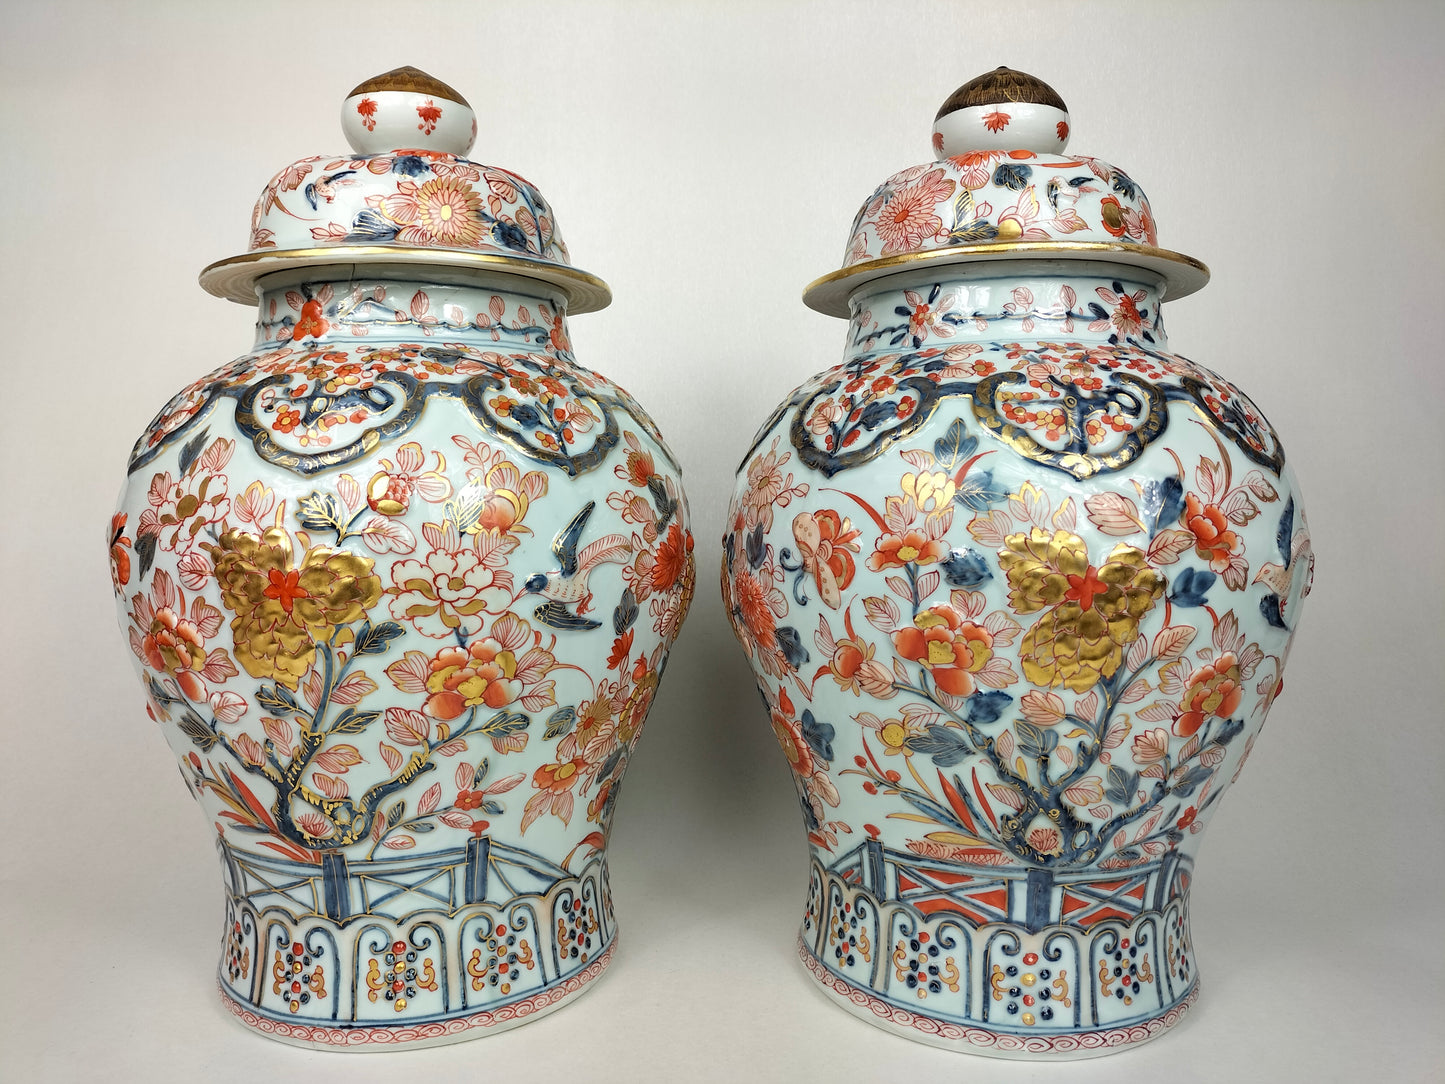 Pair antique French imari lidded vases decorated with floral motifs // Samson - 19th century